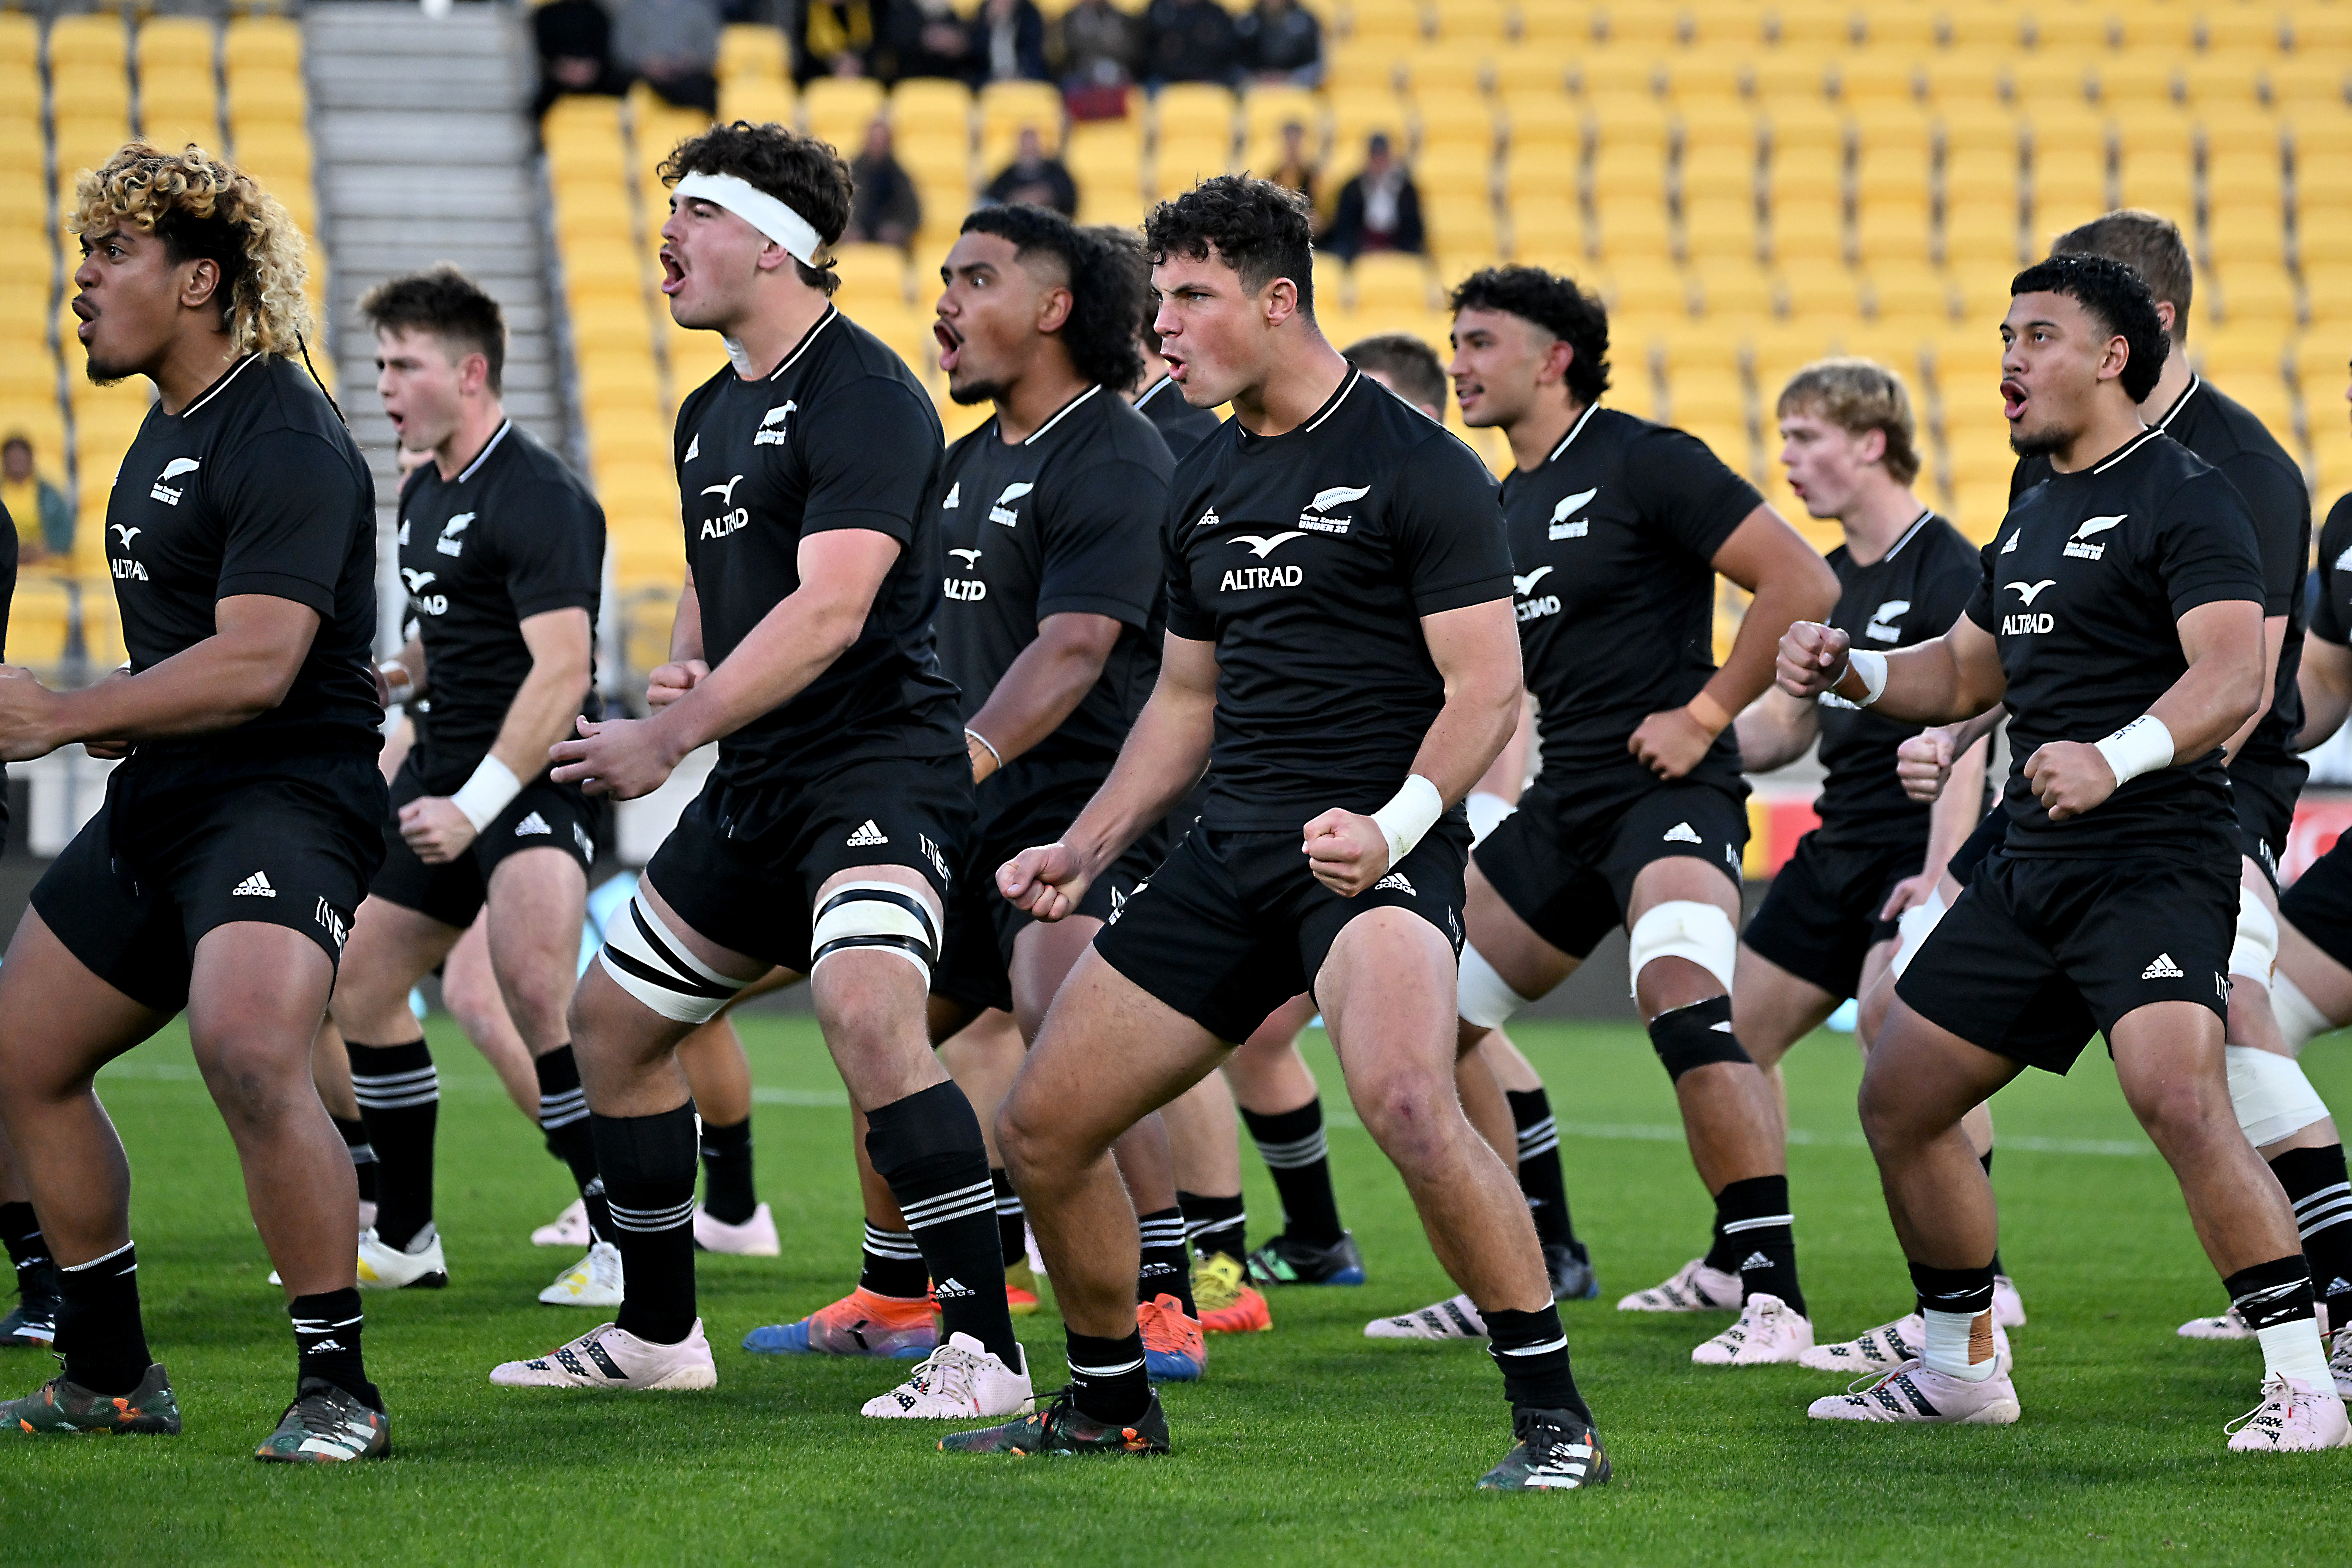 New Zealand Under 20s named for opening match of World Championships